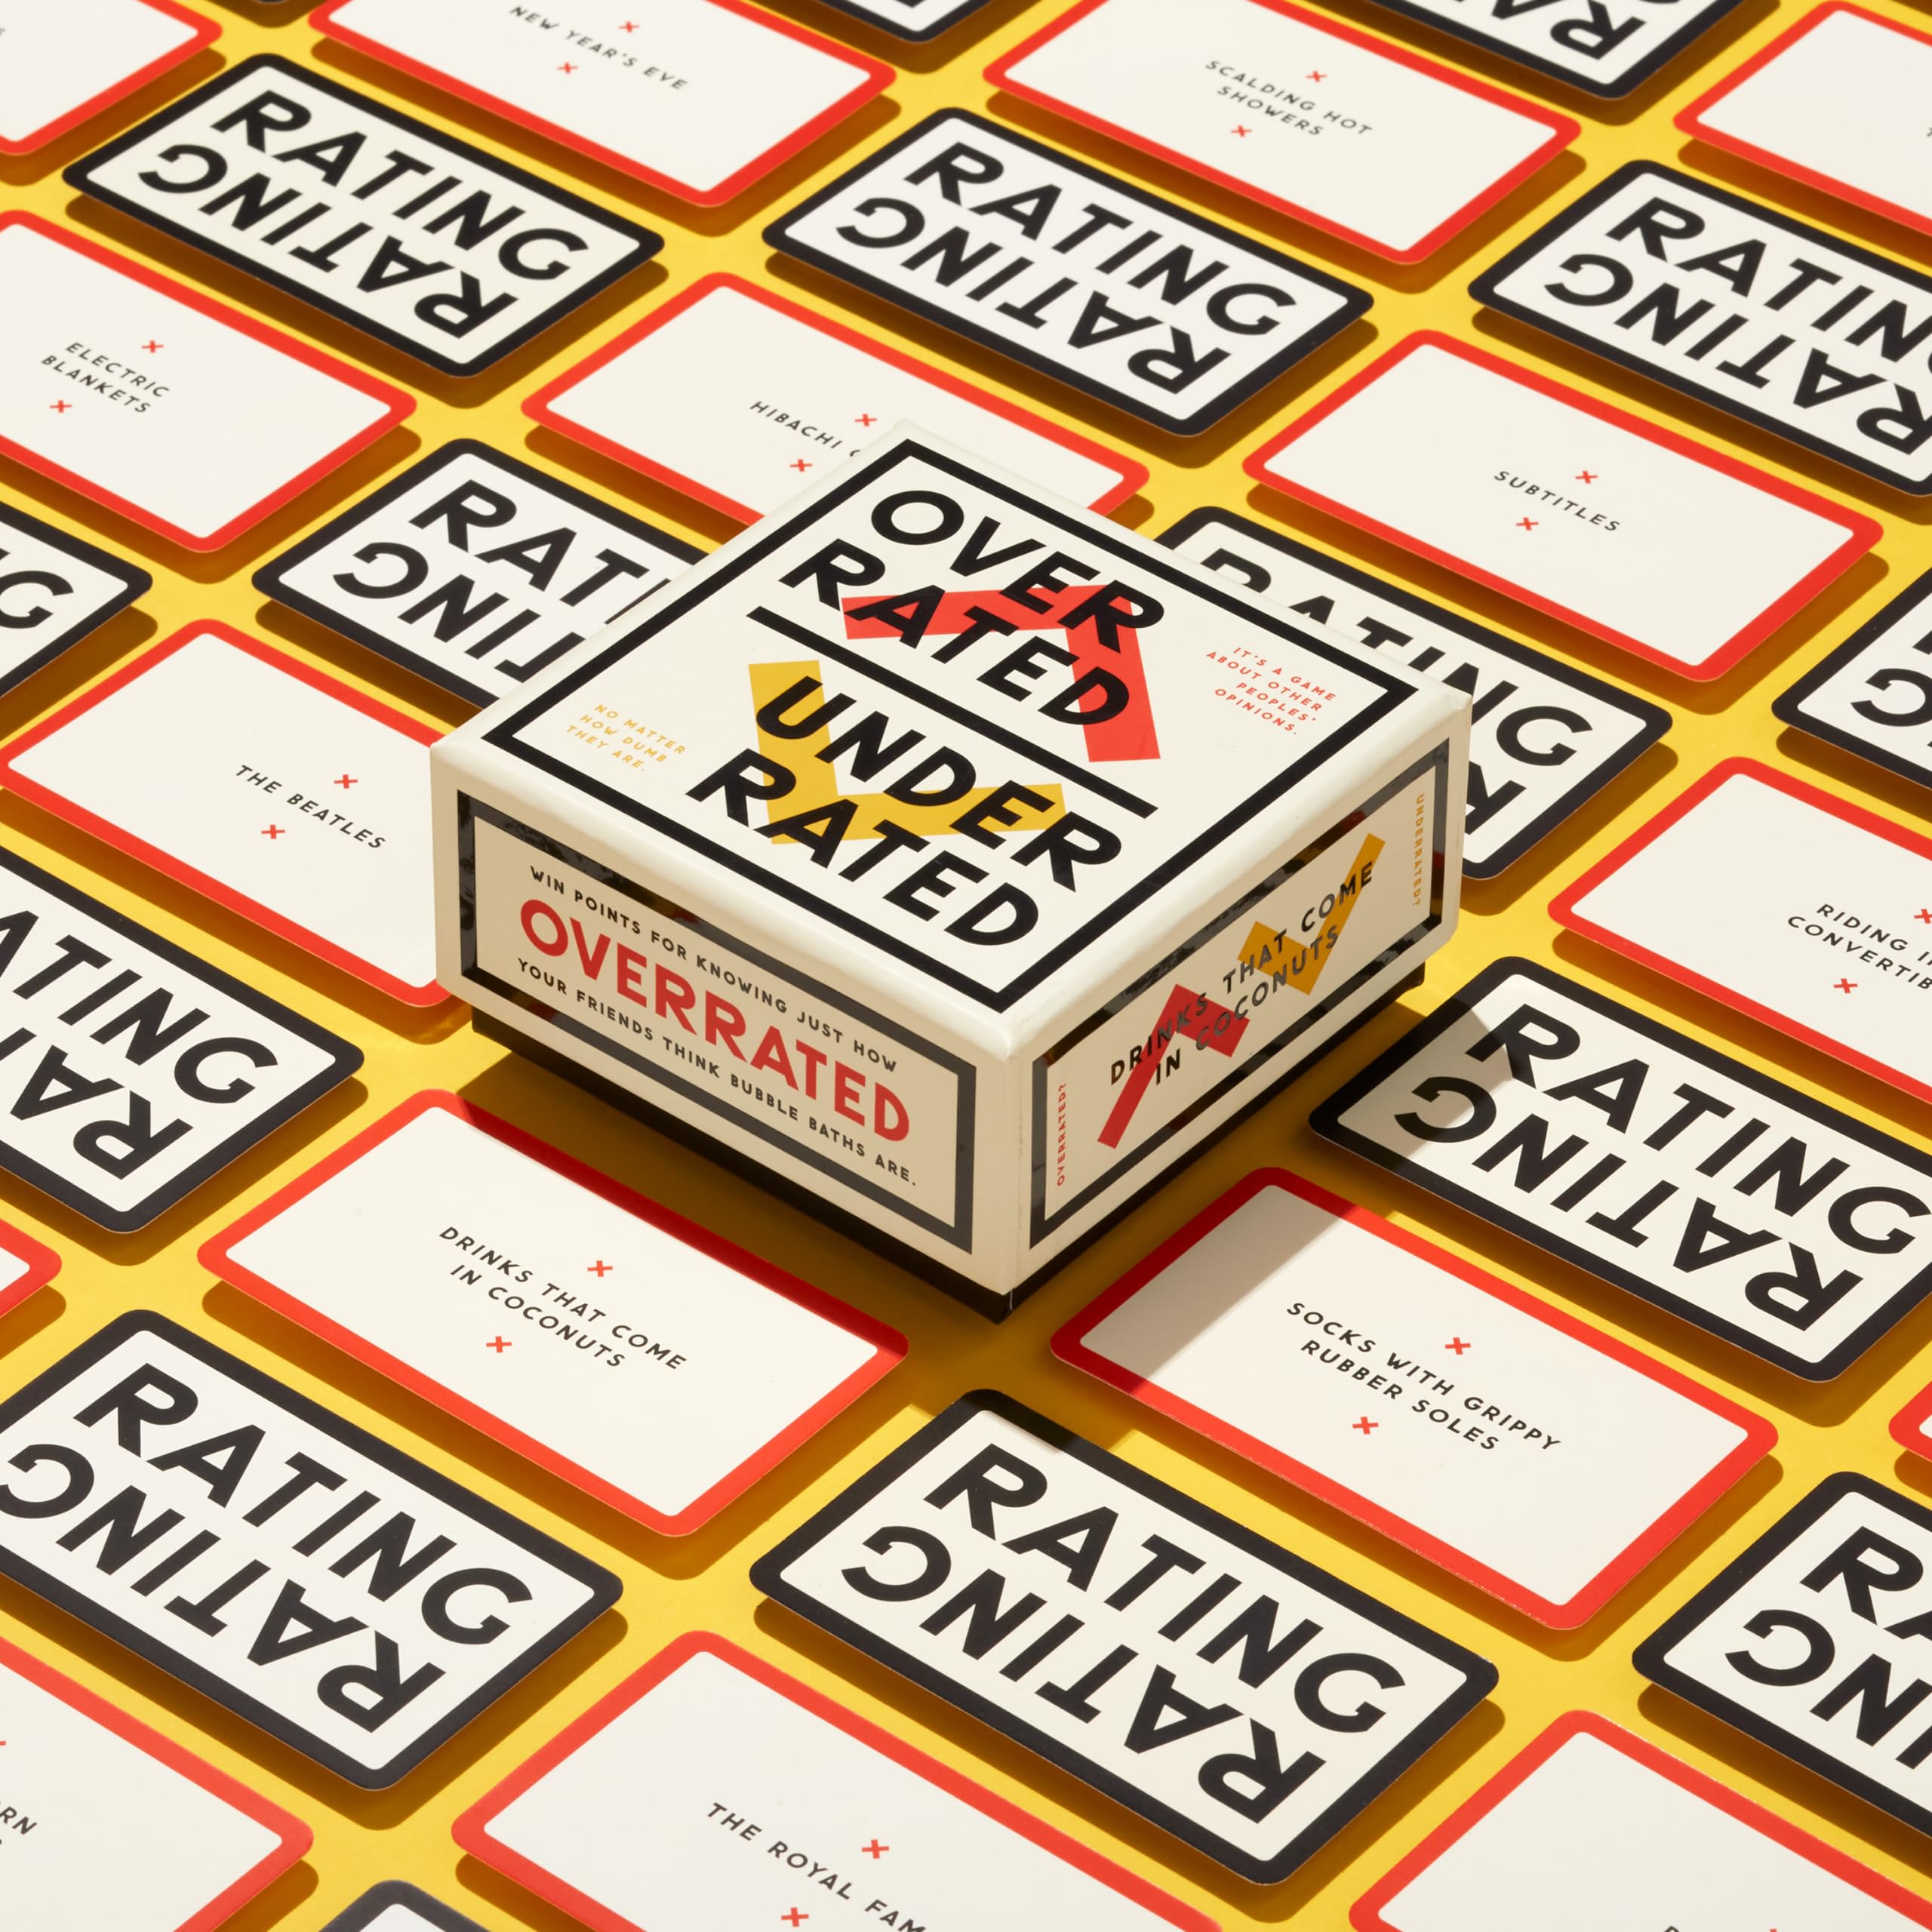 Brass Monkey Underrated Overrated - Social Party Game with 300+ Game Card Prompts for Debating Everything